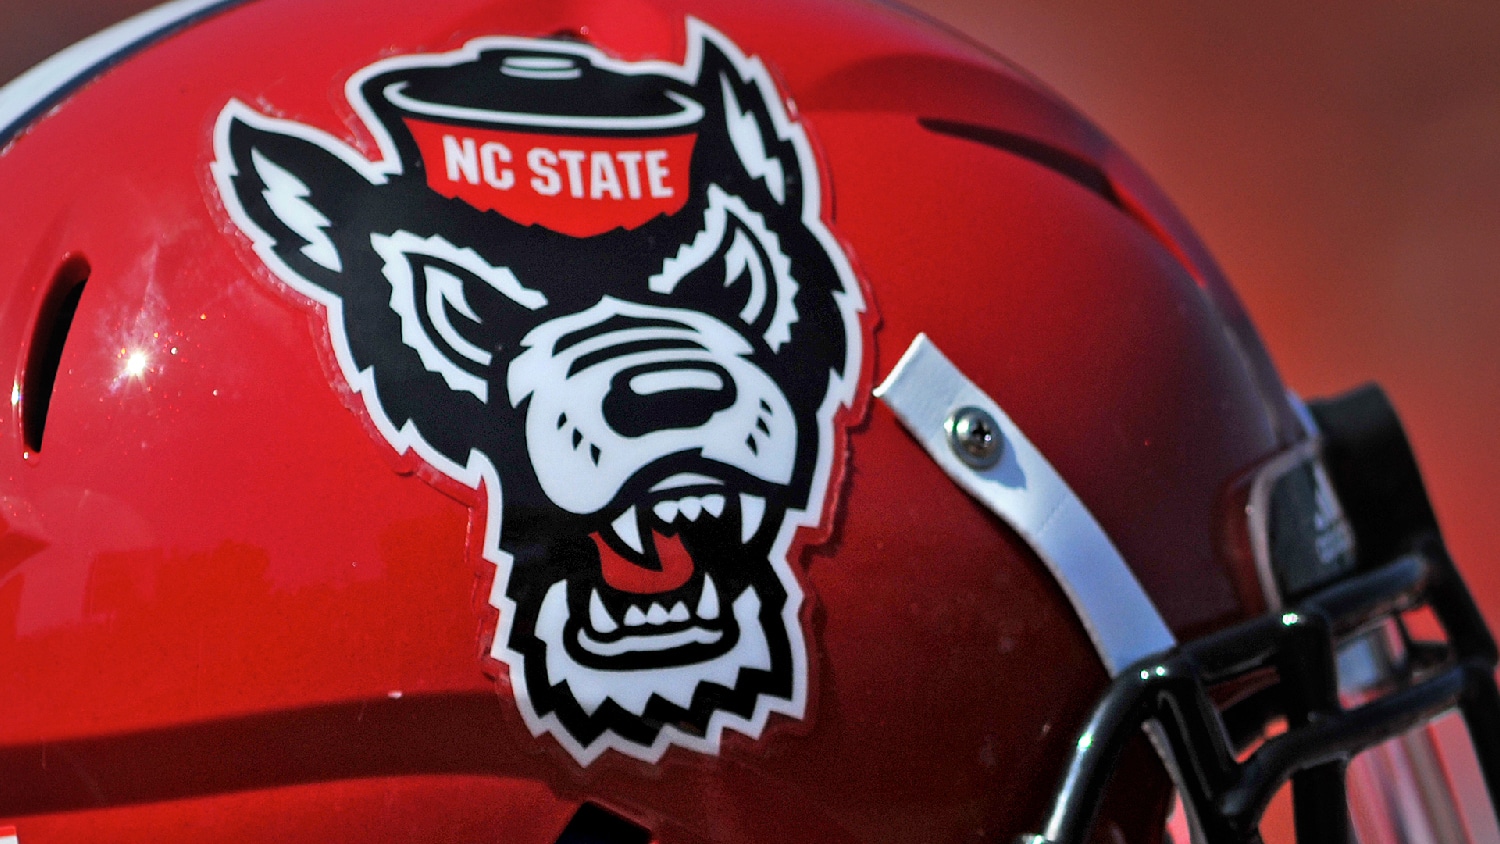 Why Is NC State Called the Wolfpack? | NC State University